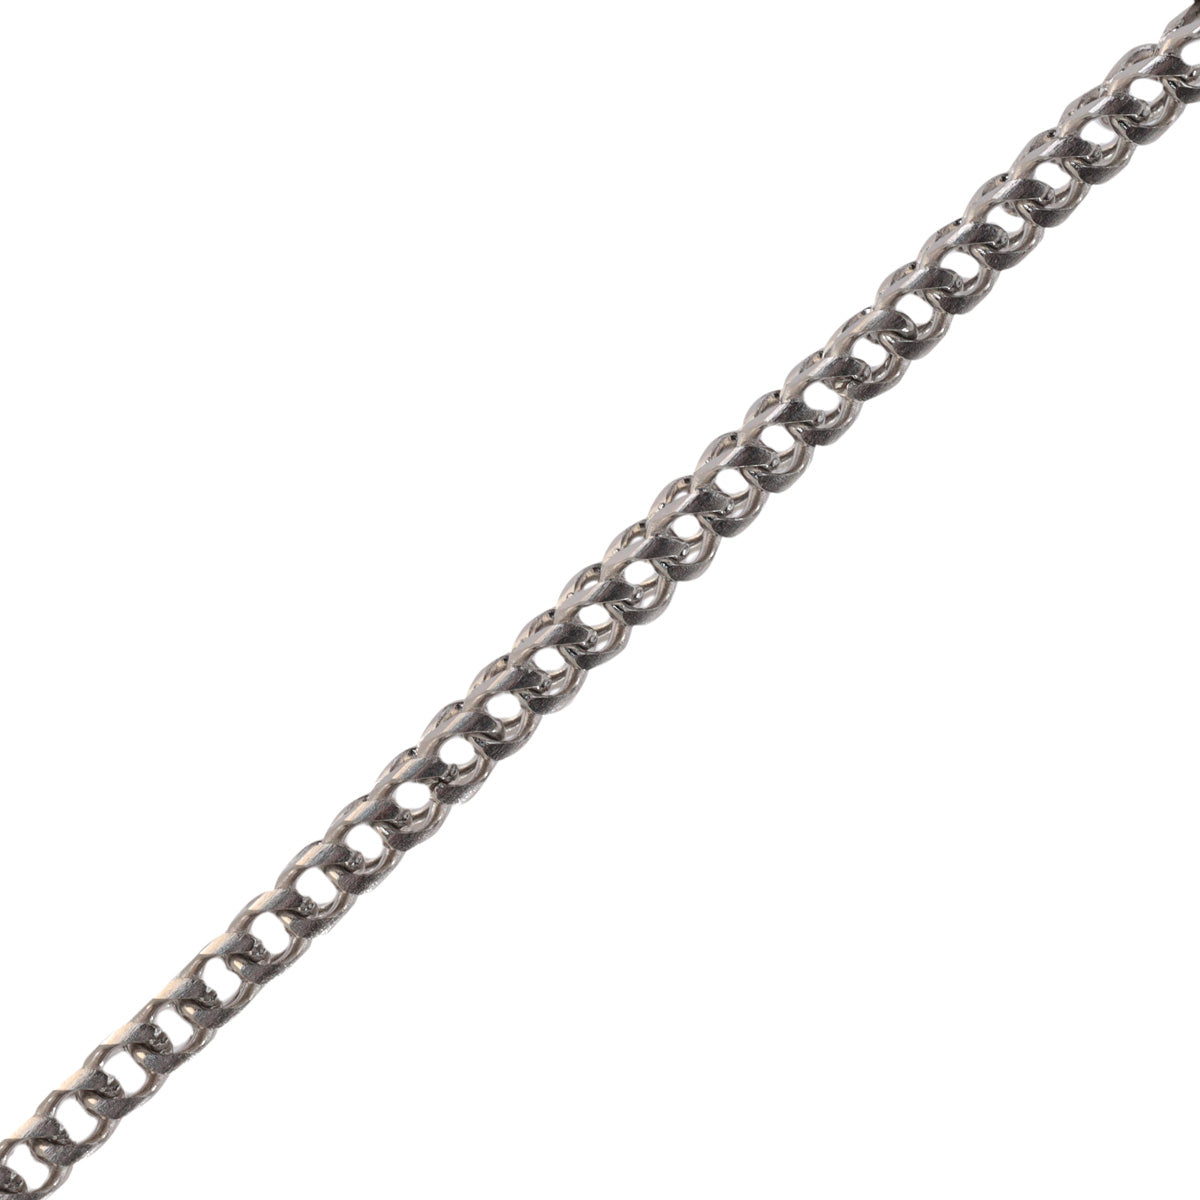 Square armoured chain steel 56cm